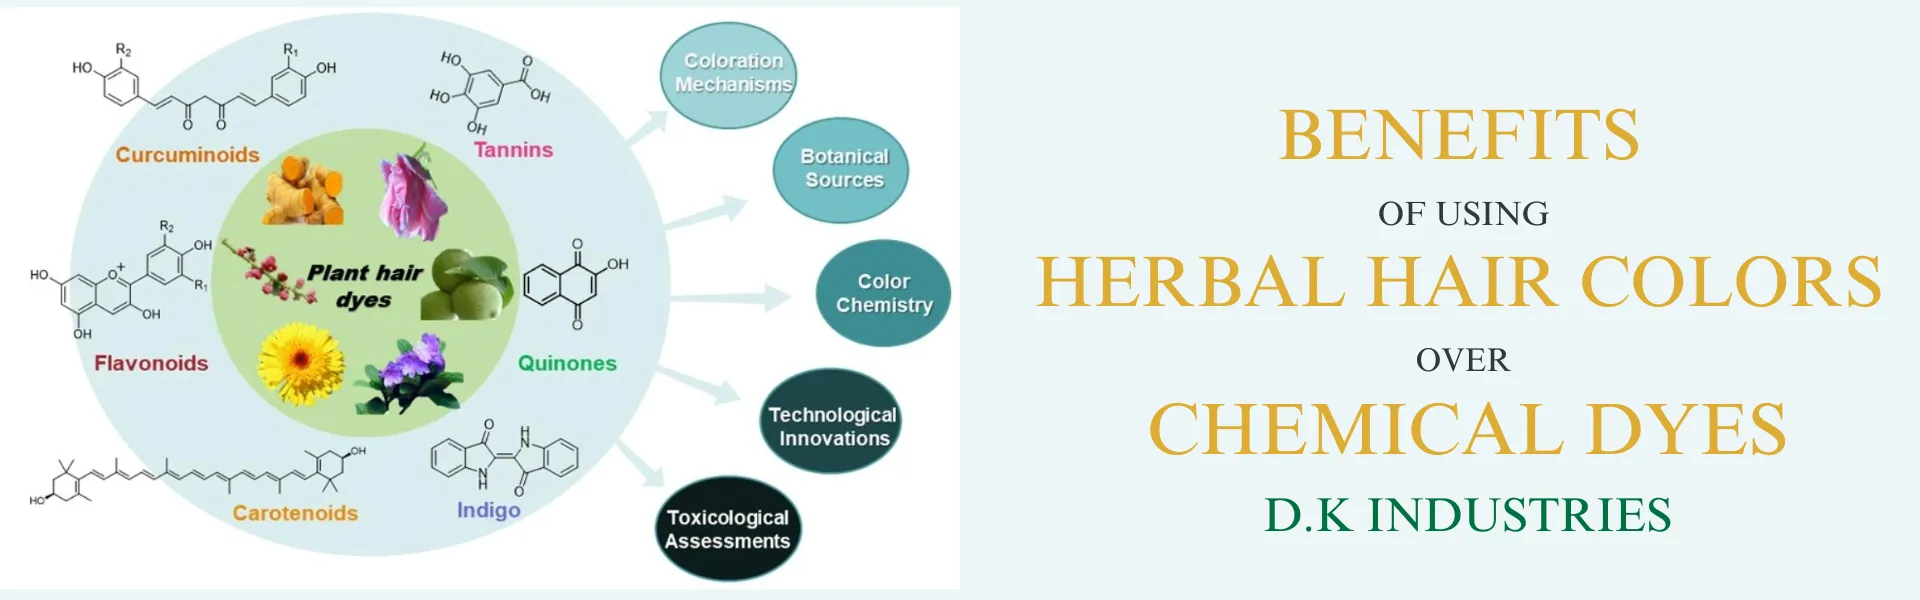 Benefits of Using Herbal Hair Colors over Chemical Dyes - www.dkihenna.com